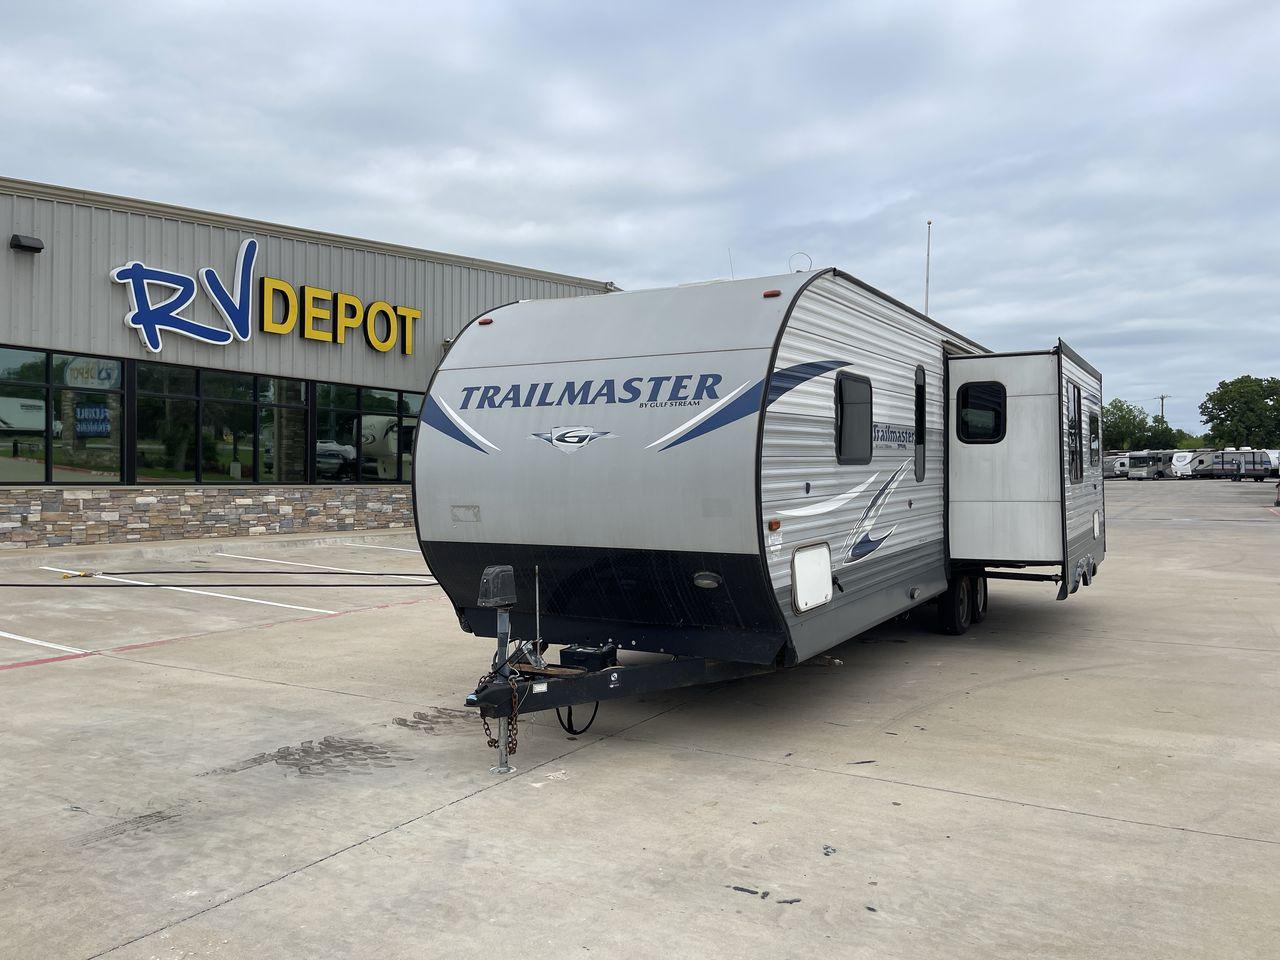 2018 GULFSTREAM TRAILMASTER 262RLS (1NL1GTP2XJ1) , Length: 31.25 ft. | Dry Weight: 6,849 lbs. | Slides: 1 transmission, located at 4319 N Main Street, Cleburne, TX, 76033, (817) 221-0660, 32.435829, -97.384178 - This 2018 Gulf Stream Trailmaster 262RLS travel trailer measures just over 31' in length. It is a dual axle, steel wheel setup with a dry weight of 6,849 lbs and a carrying capacity of 1,421 lbs. With a dry weight of 6,849 lbs., the Trailmaster 262RLS offers easy maneuverability without compromising - Photo #0